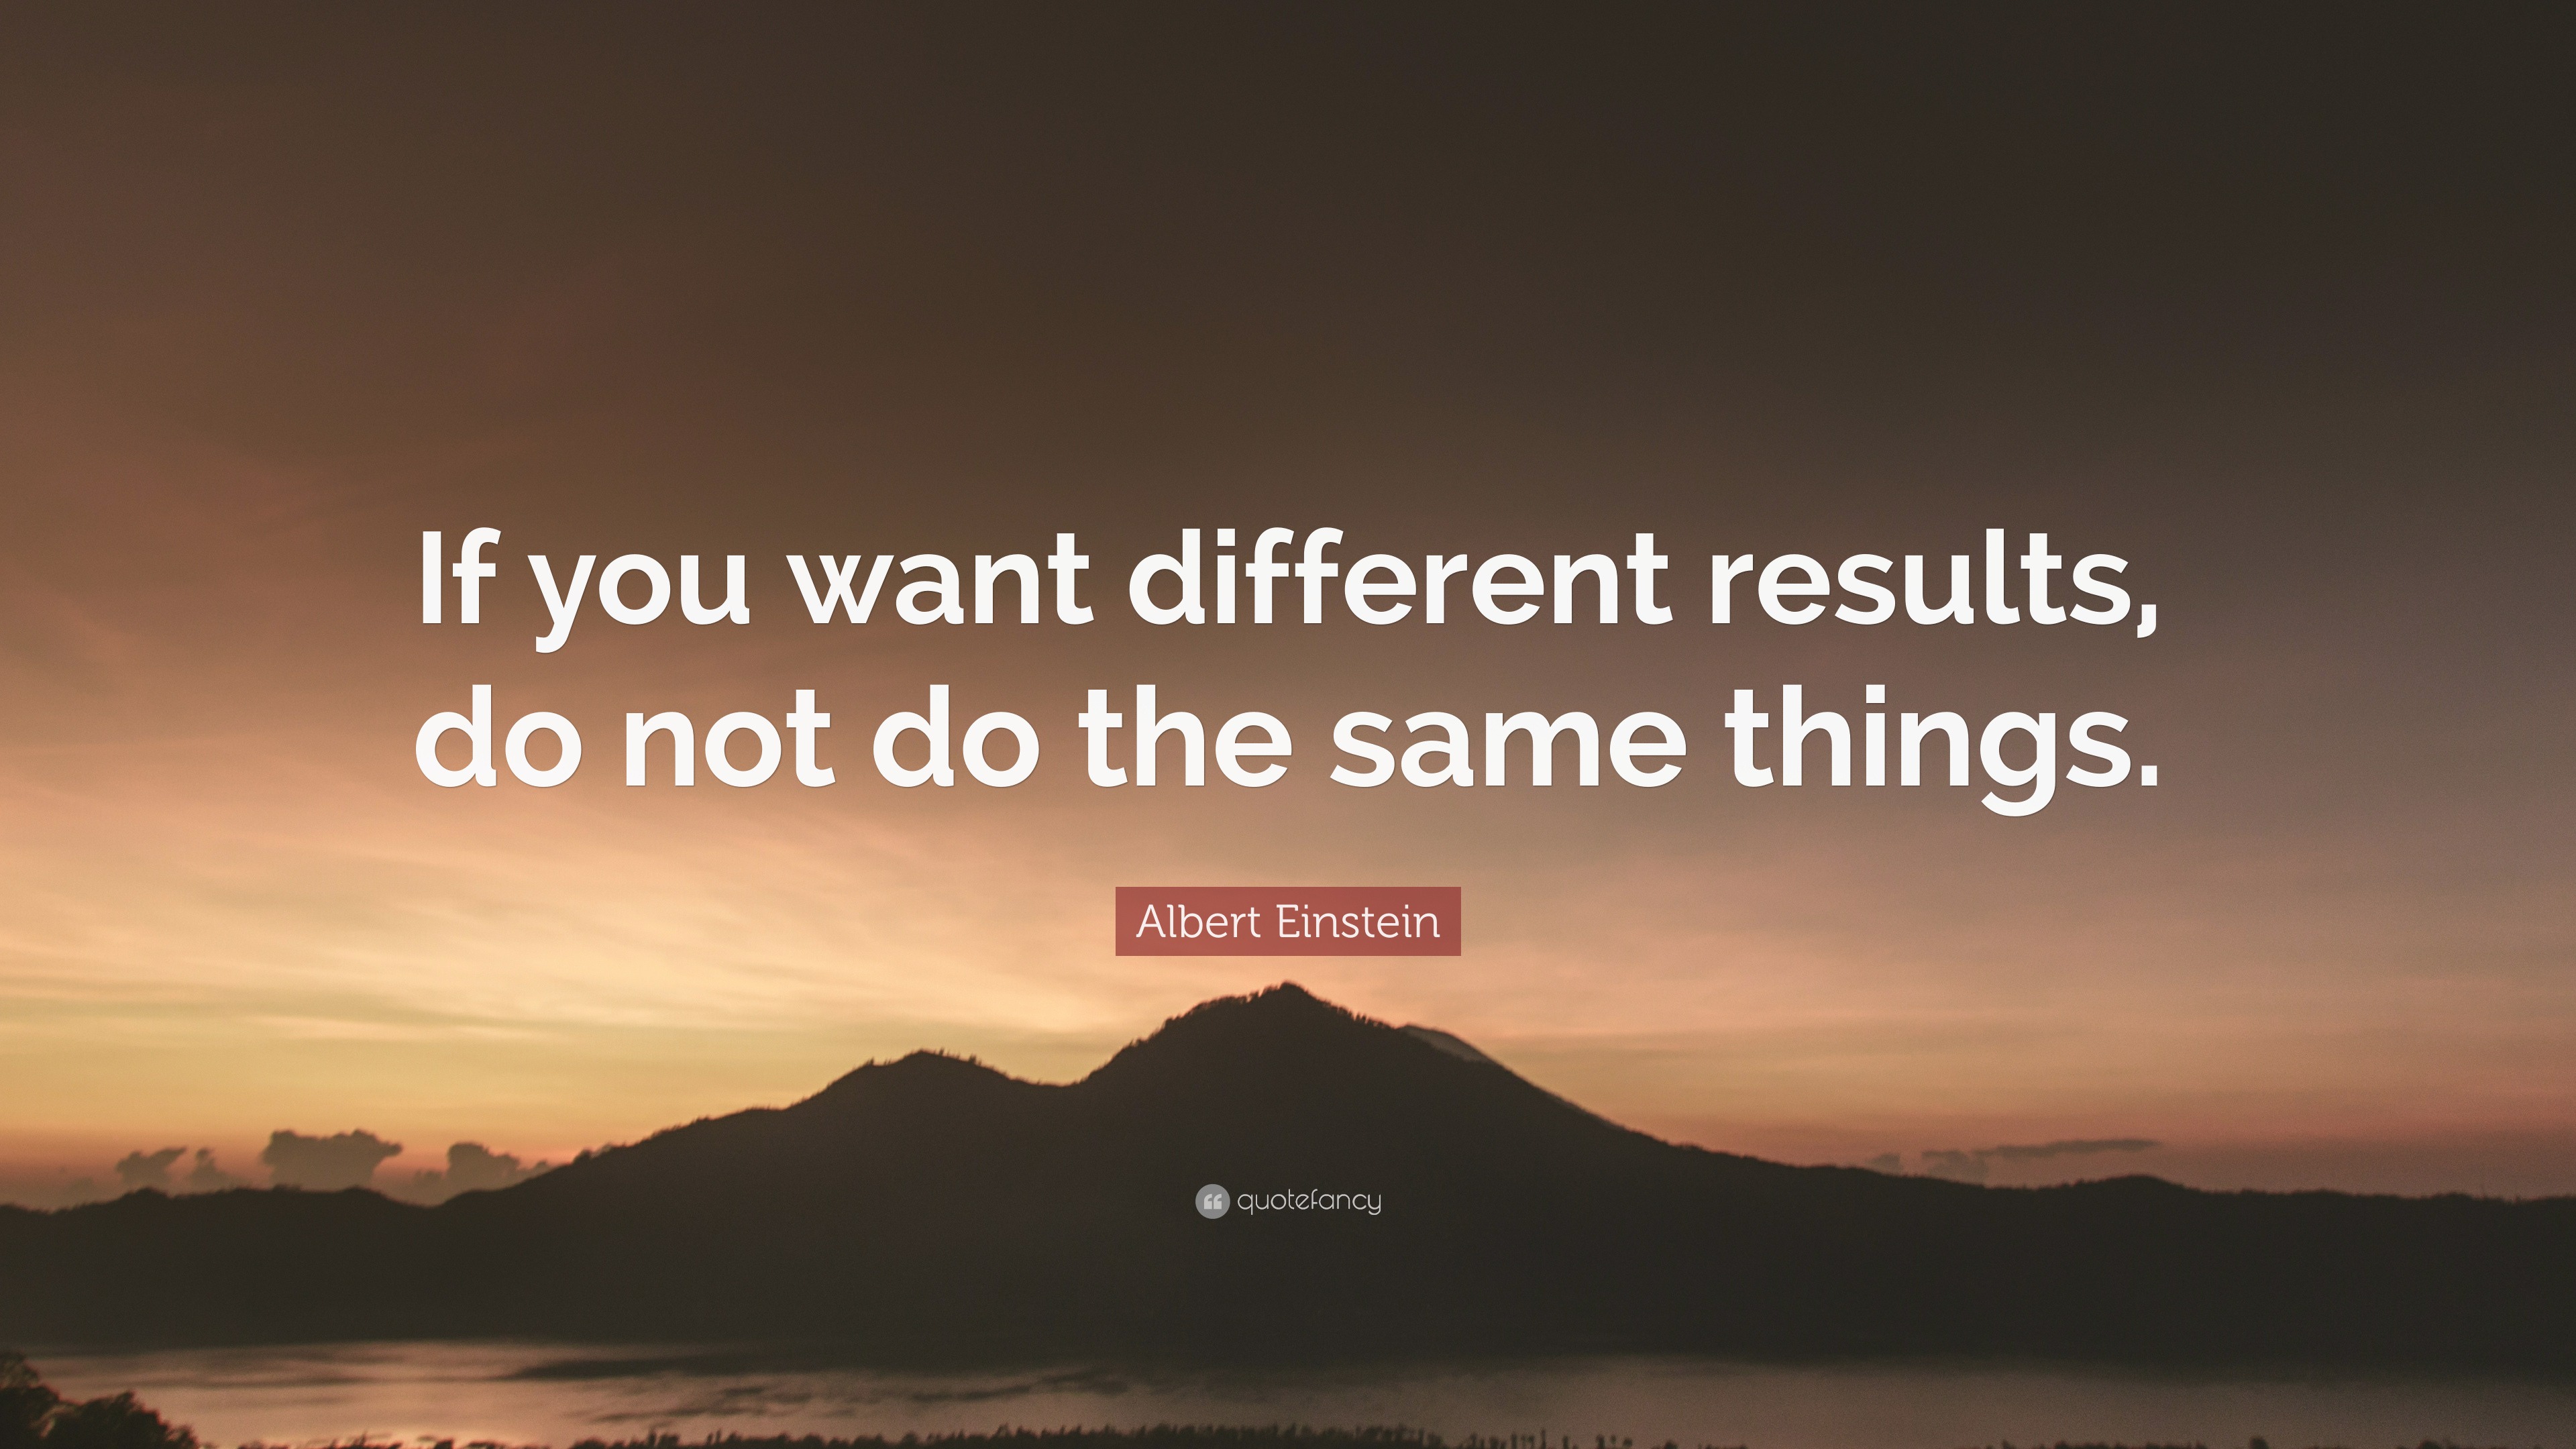 Albert Einstein Quote “if You Want Different Results Do Not Do The Same Things”